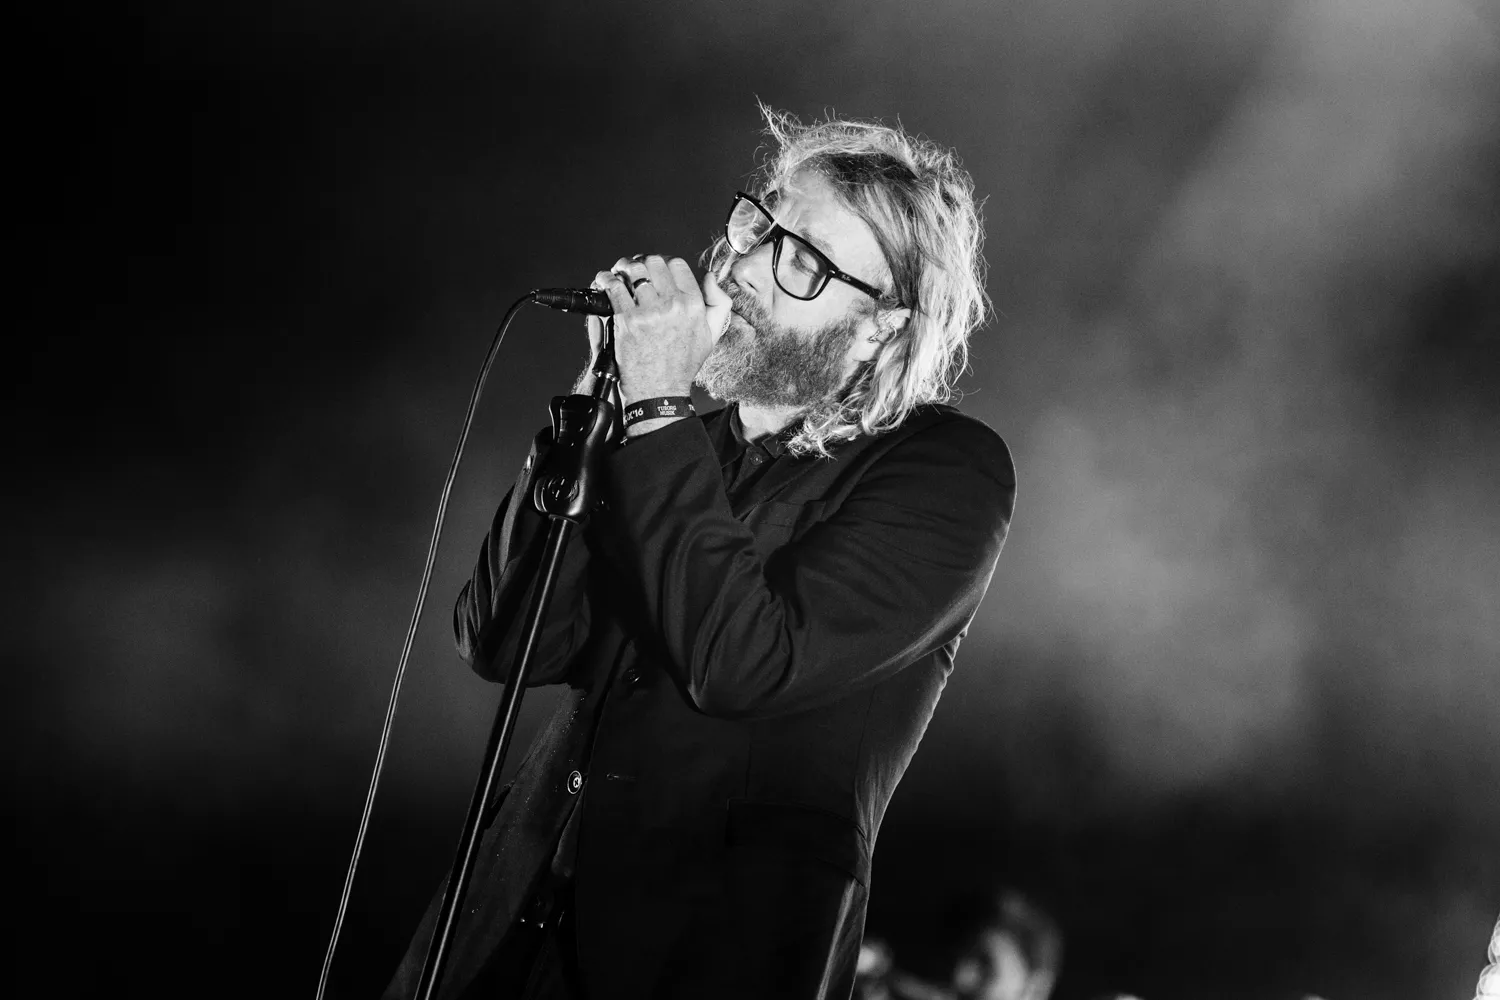 BÄST JUST NU: The National – The System Only Dreams In Total Darkness